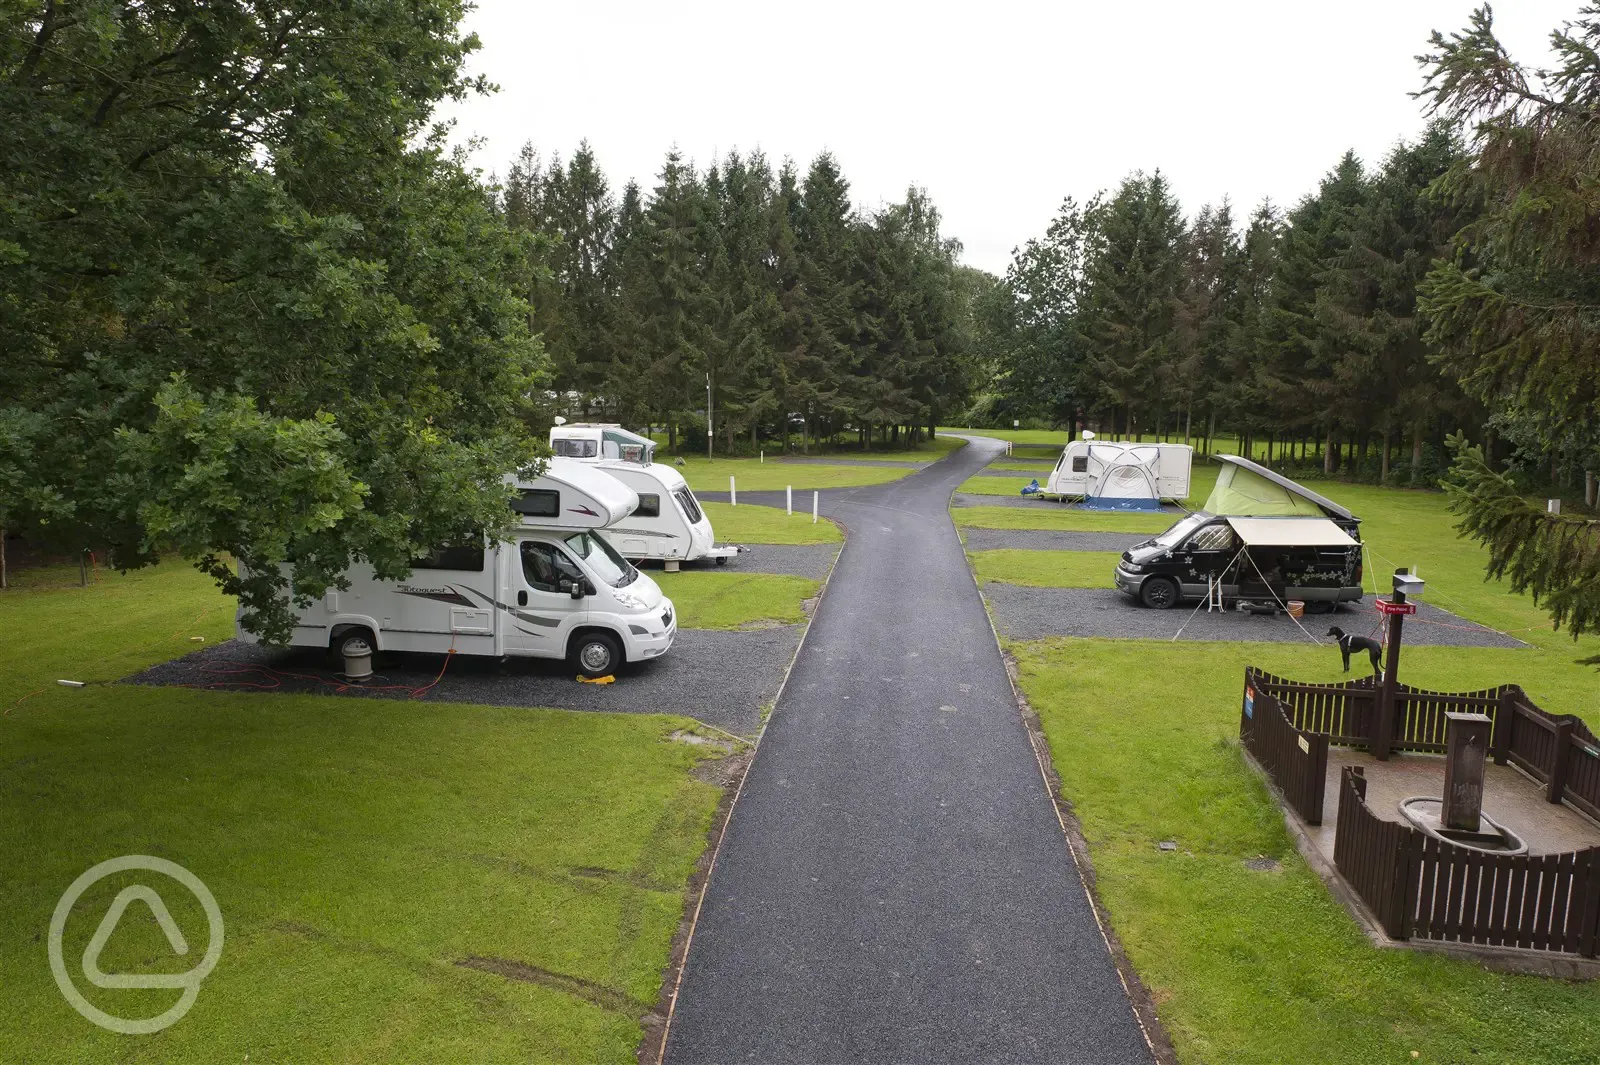 Units on Hardstanding pitches at Blackmore Club Campsite